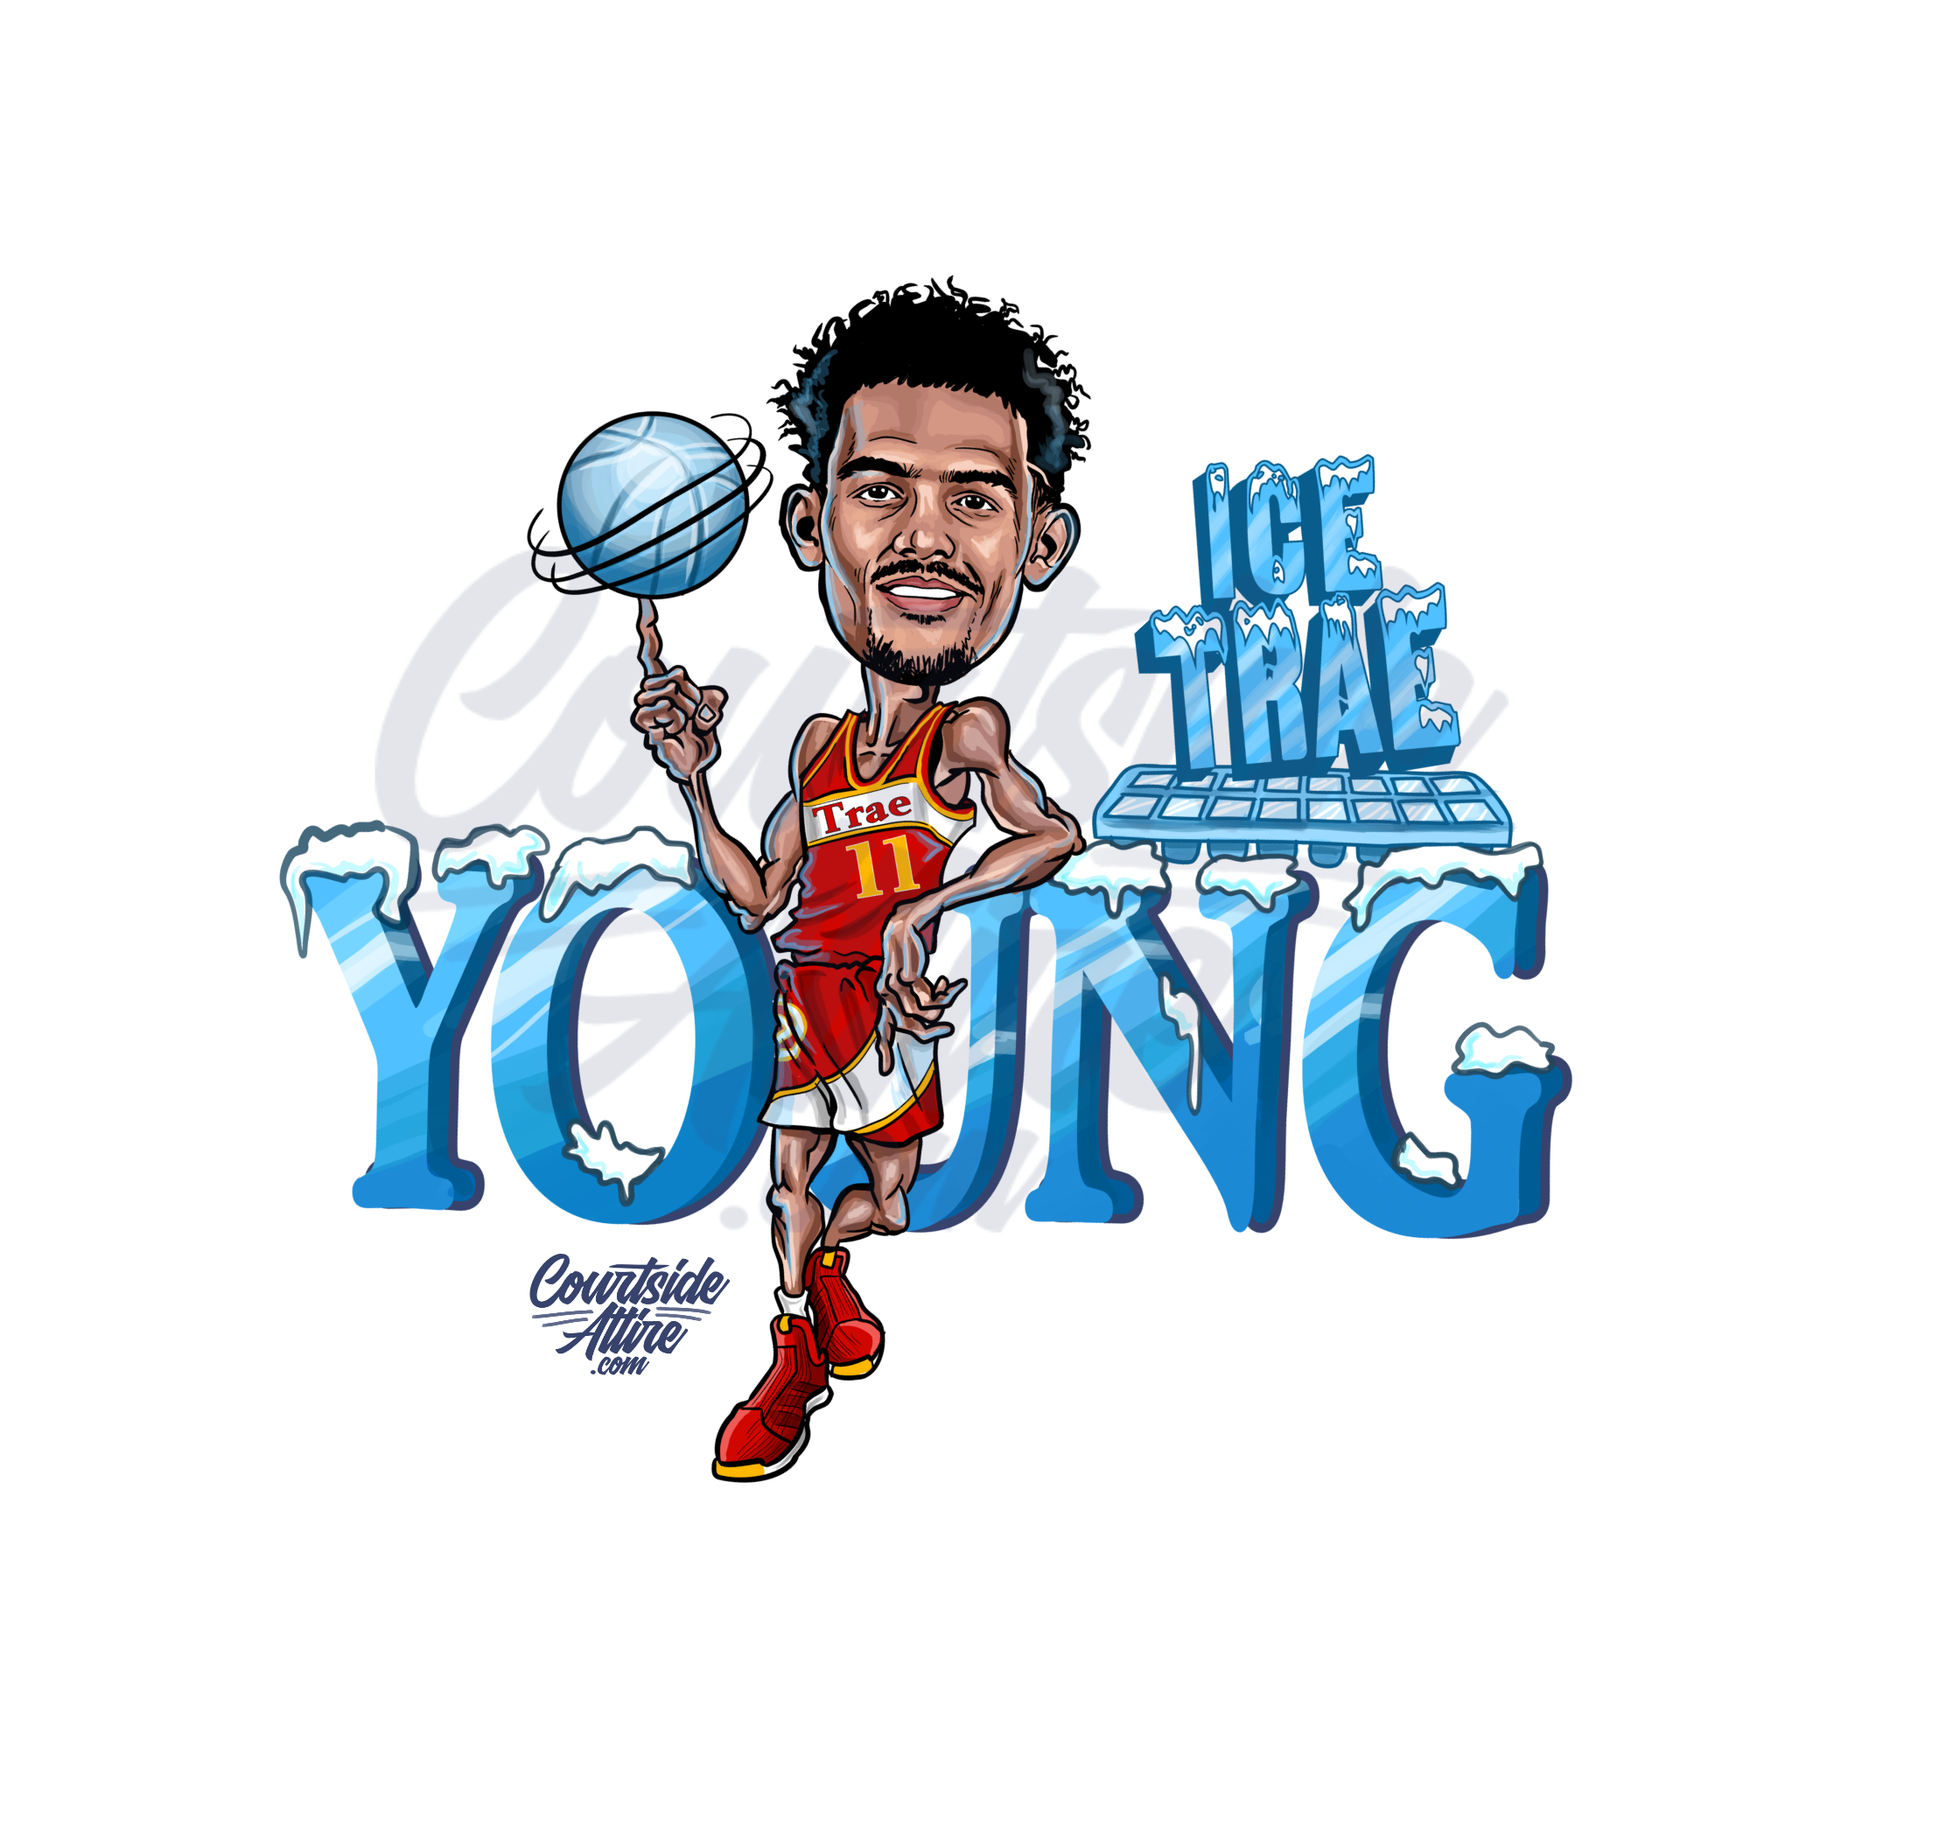 trae young jersey youth large